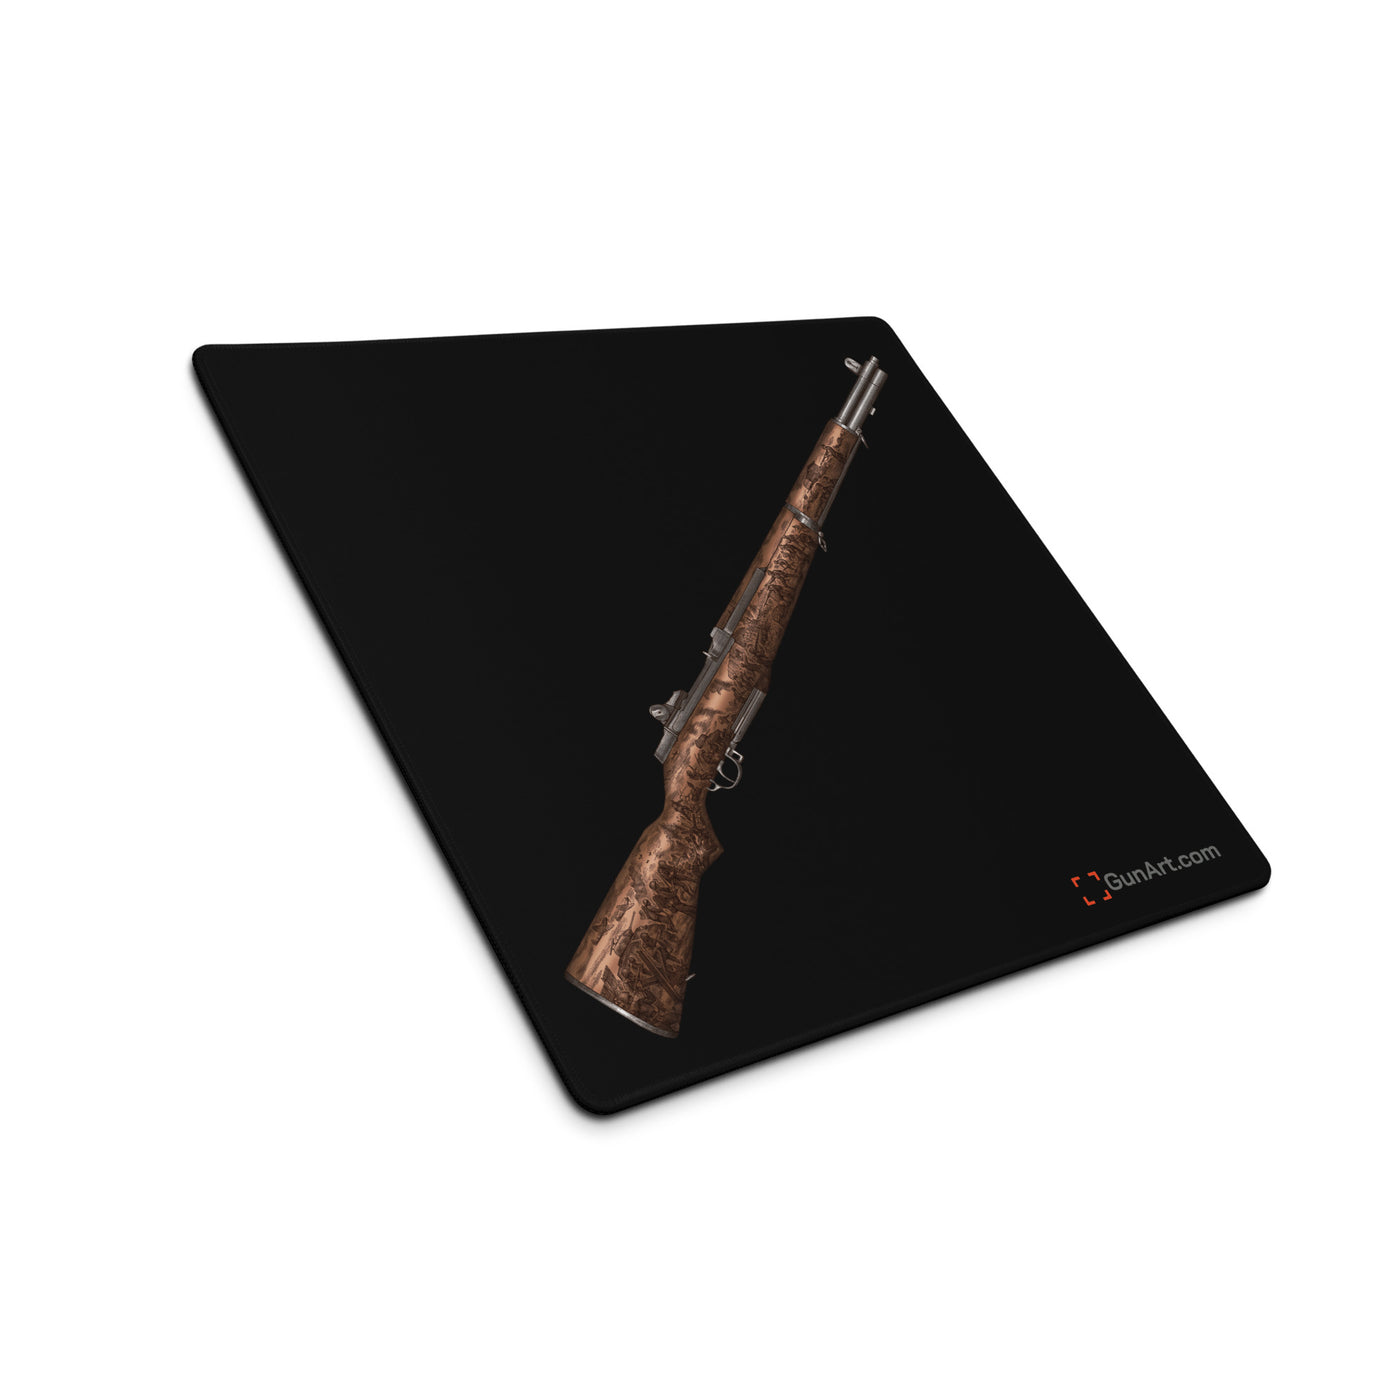 Honoring The Brave / M1 Garand / World War II D-Day Gaming Mouse Pad - Black Background